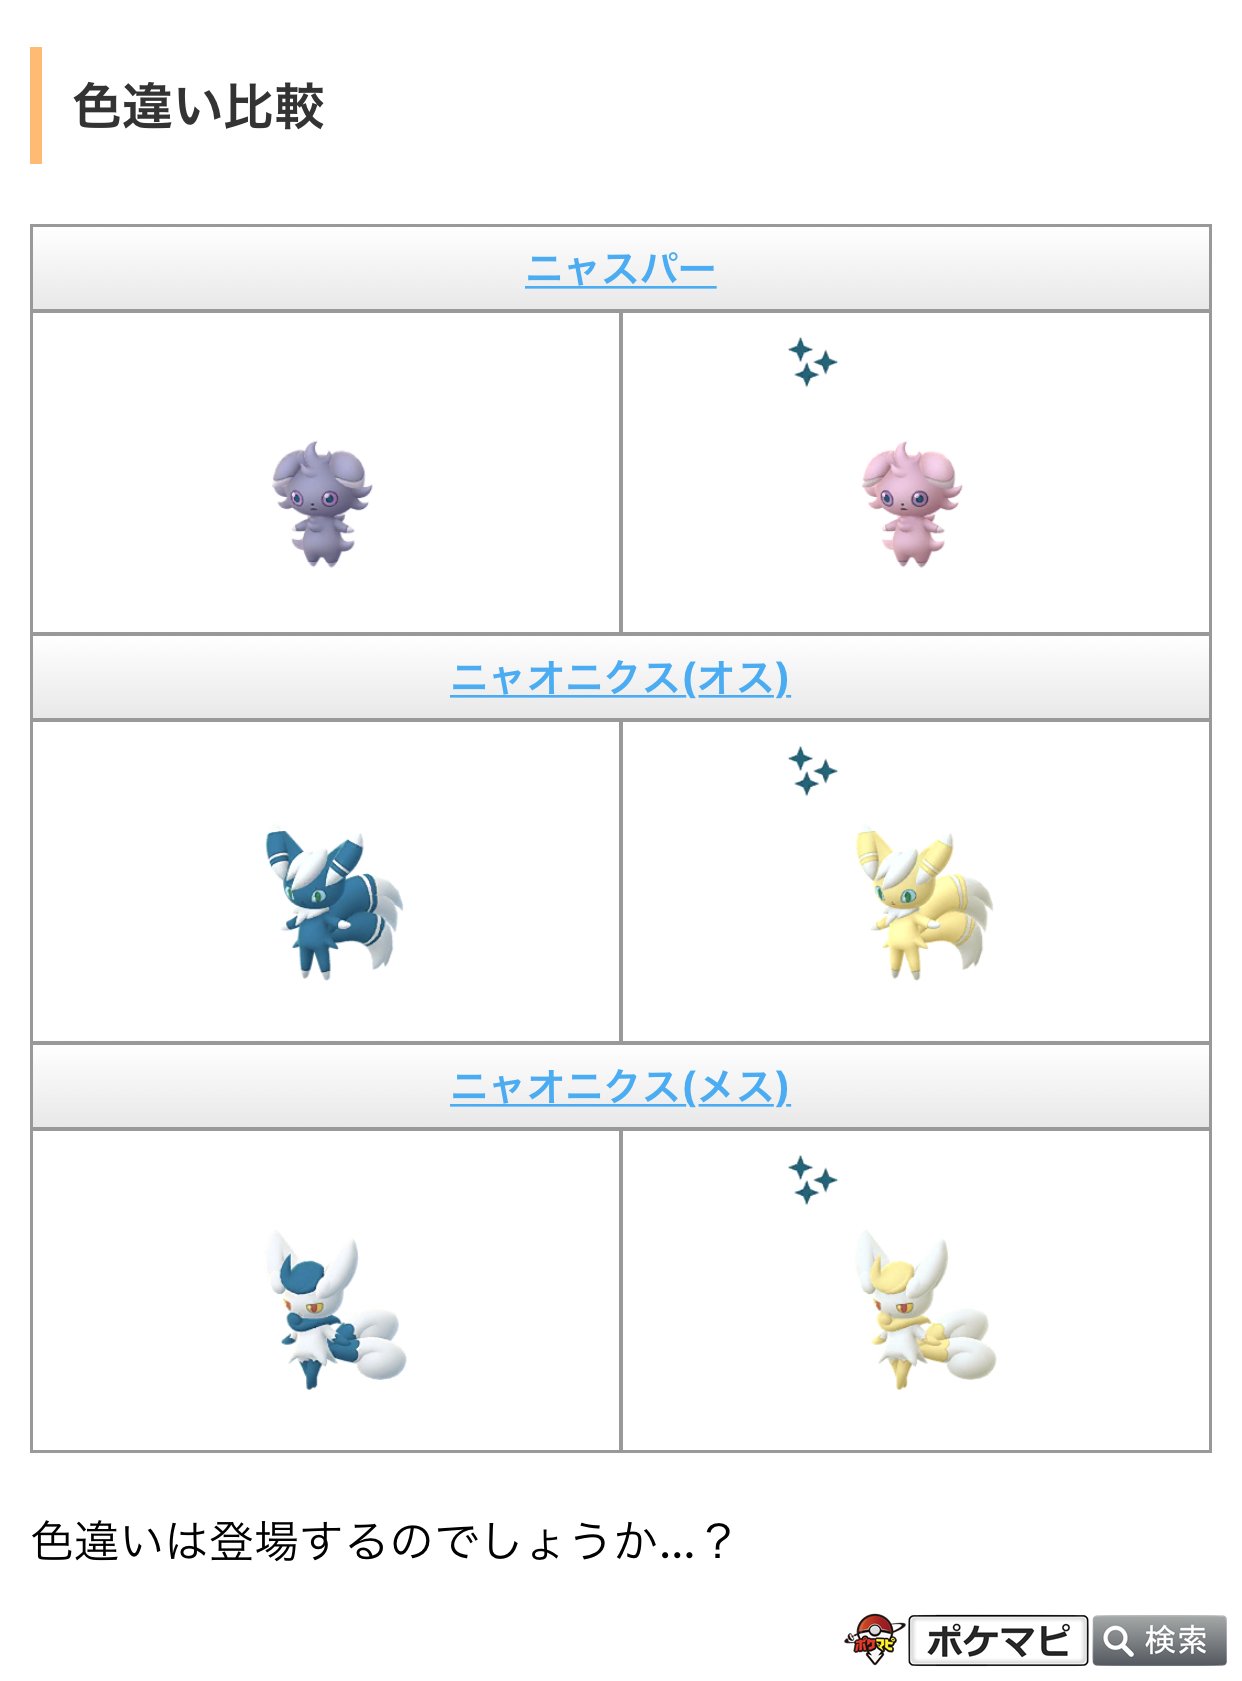 Auraguardians Nice Shiny Of Espurr ニャスパー And Meowstic ニャオニクス Male And Female If This Release Will Be Great Kick Off Generation 6 T Co Wjcpqrablg Twitter